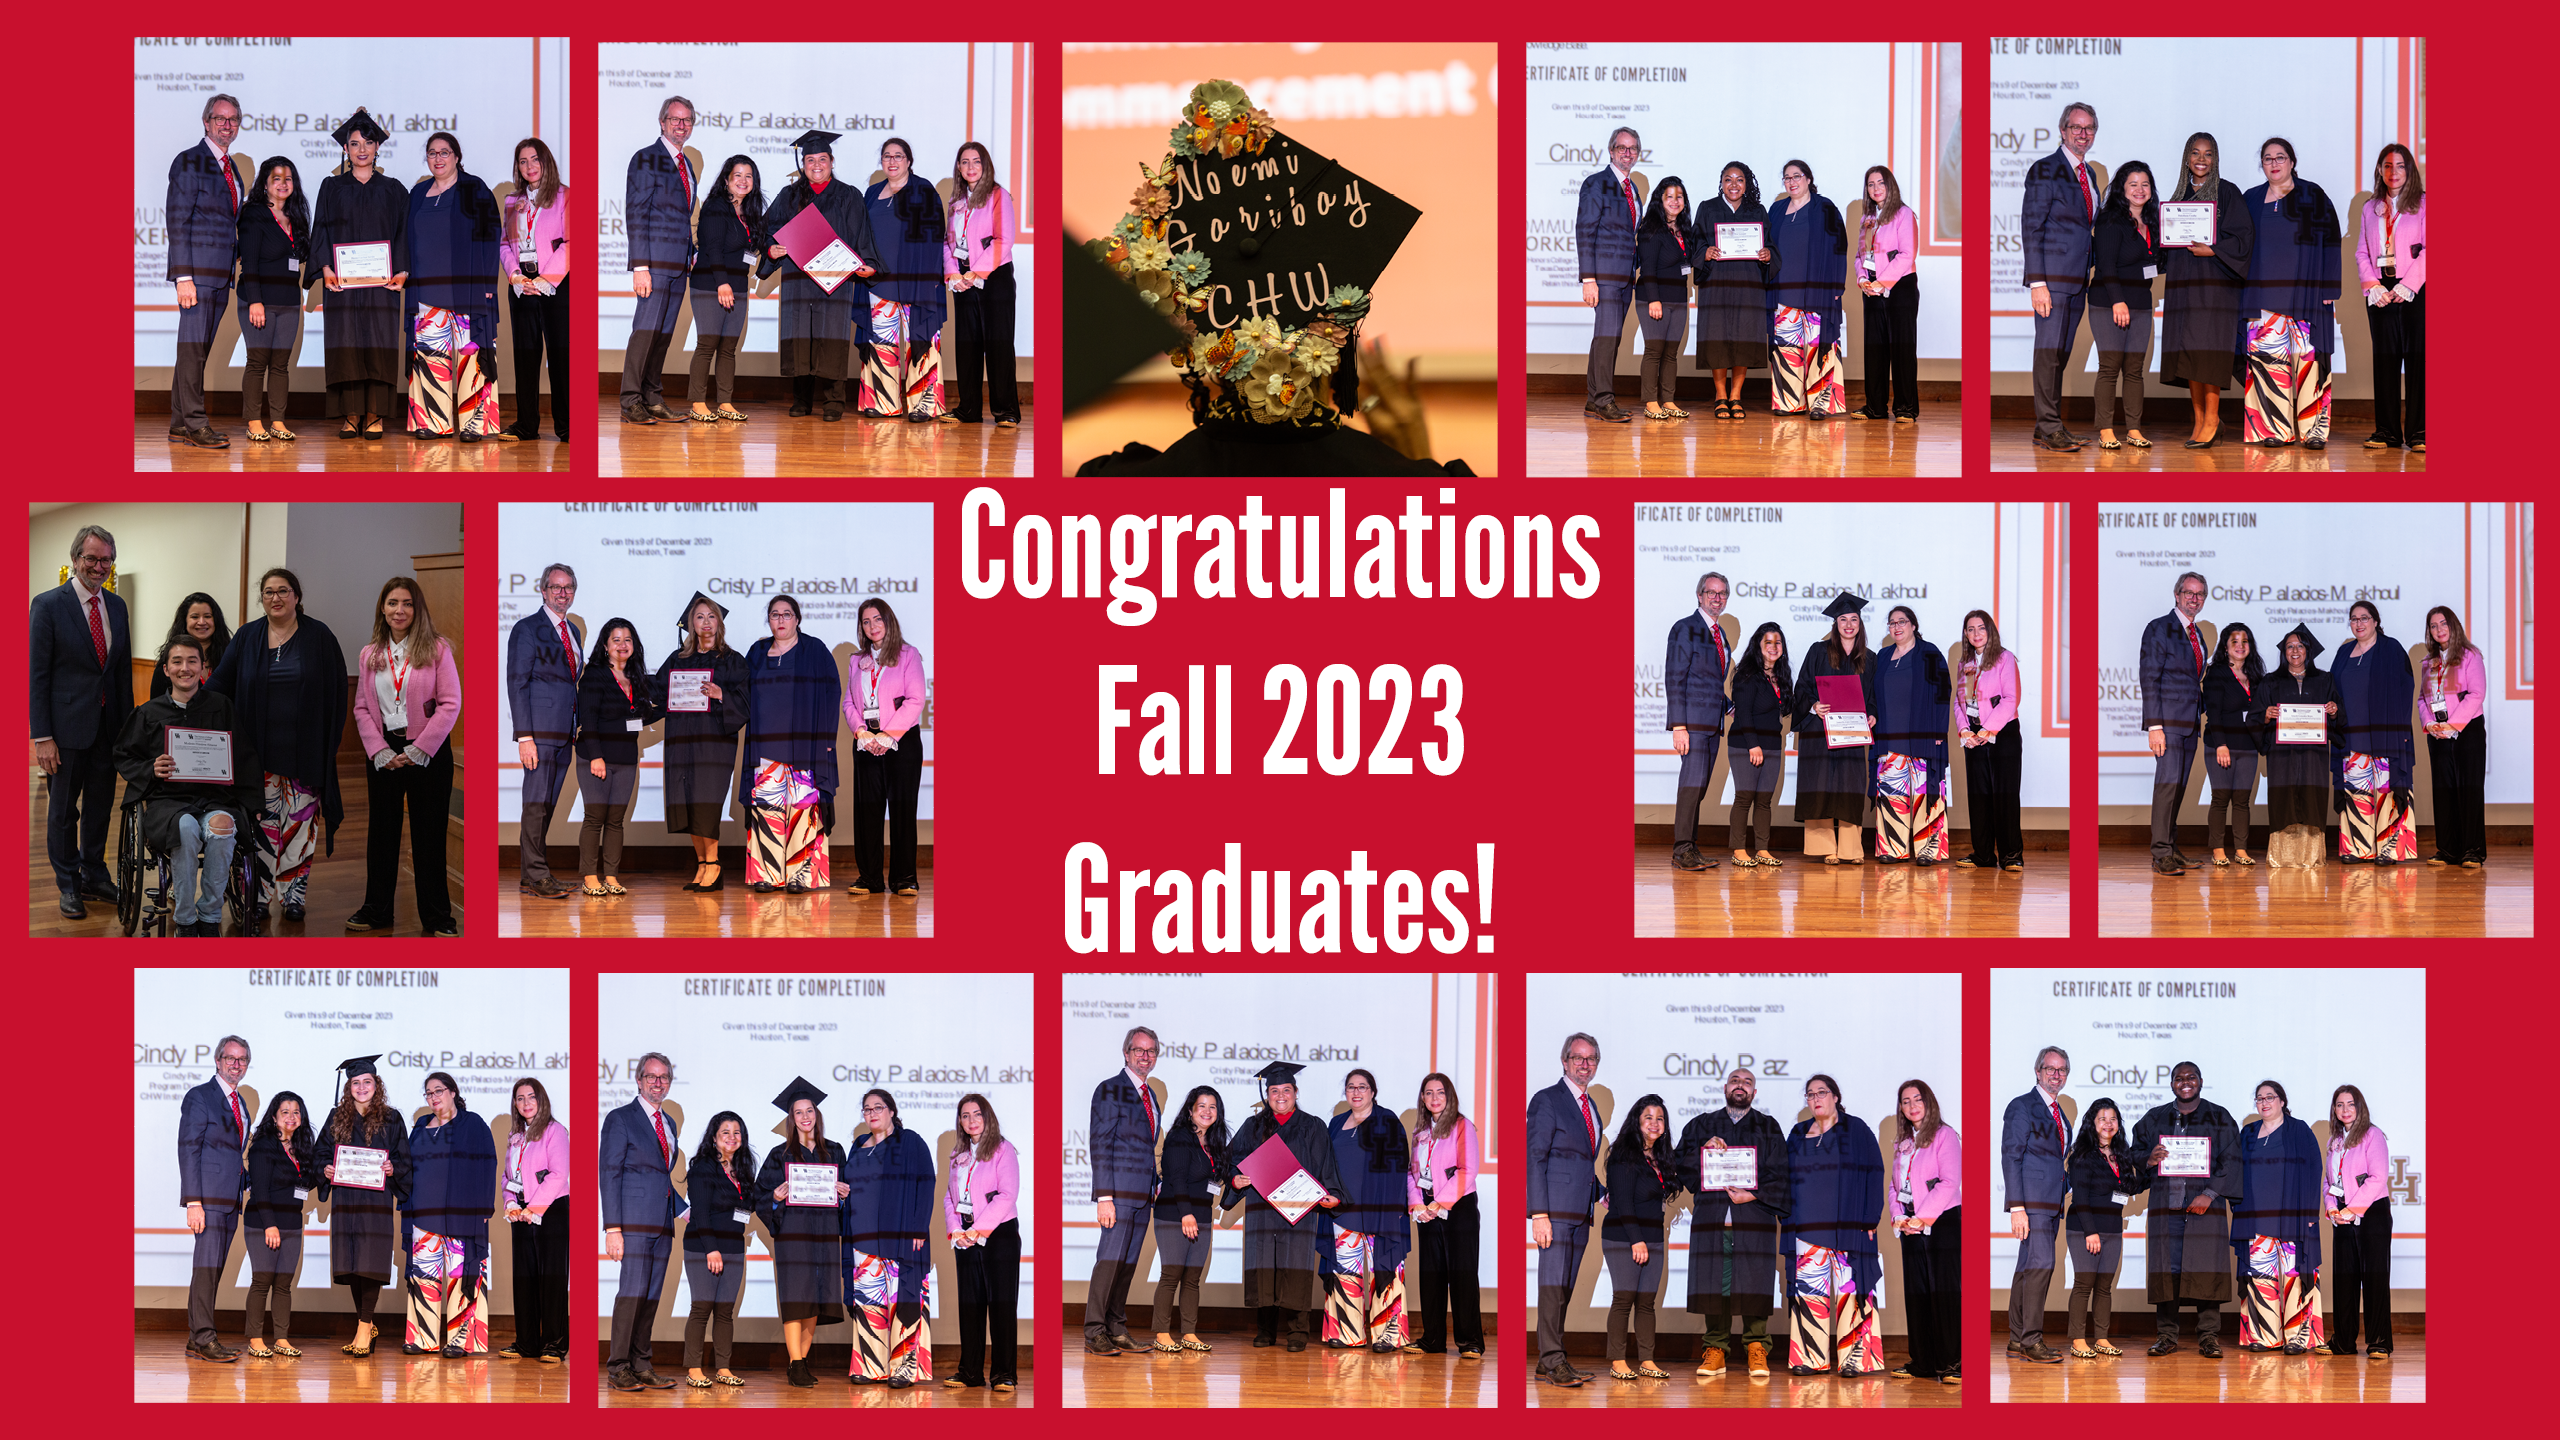 congrats-fall-2023-graduates-for-the-training-center-page.png